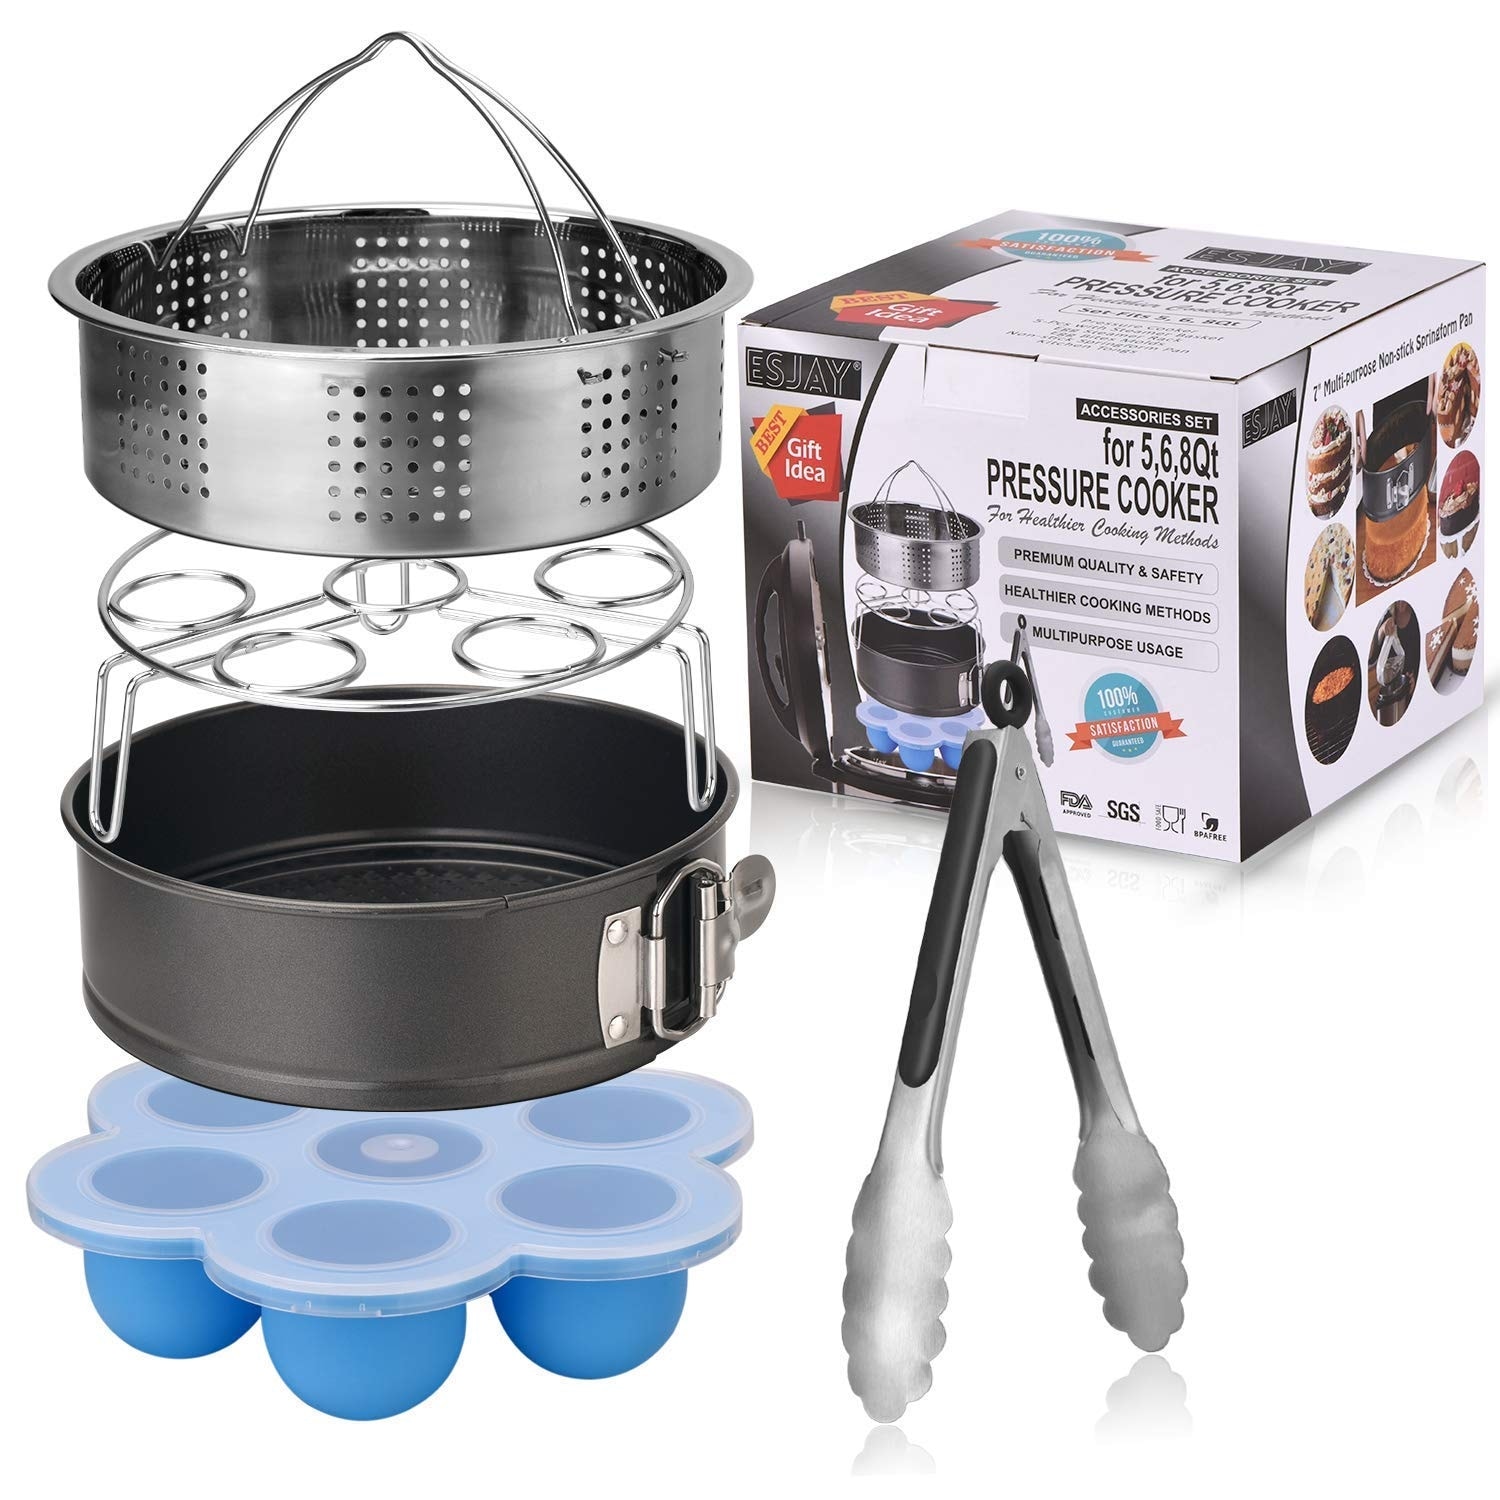 https://ak1.ostkcdn.com/images/products/is/images/direct/00852d41f40b411f8132befb427578c47056ae35/FITNATE-8-Pack-Cooking-Instant-Pot-Accessories-Set-Steamer-Basket-Egg-Steamer-Rack.jpg